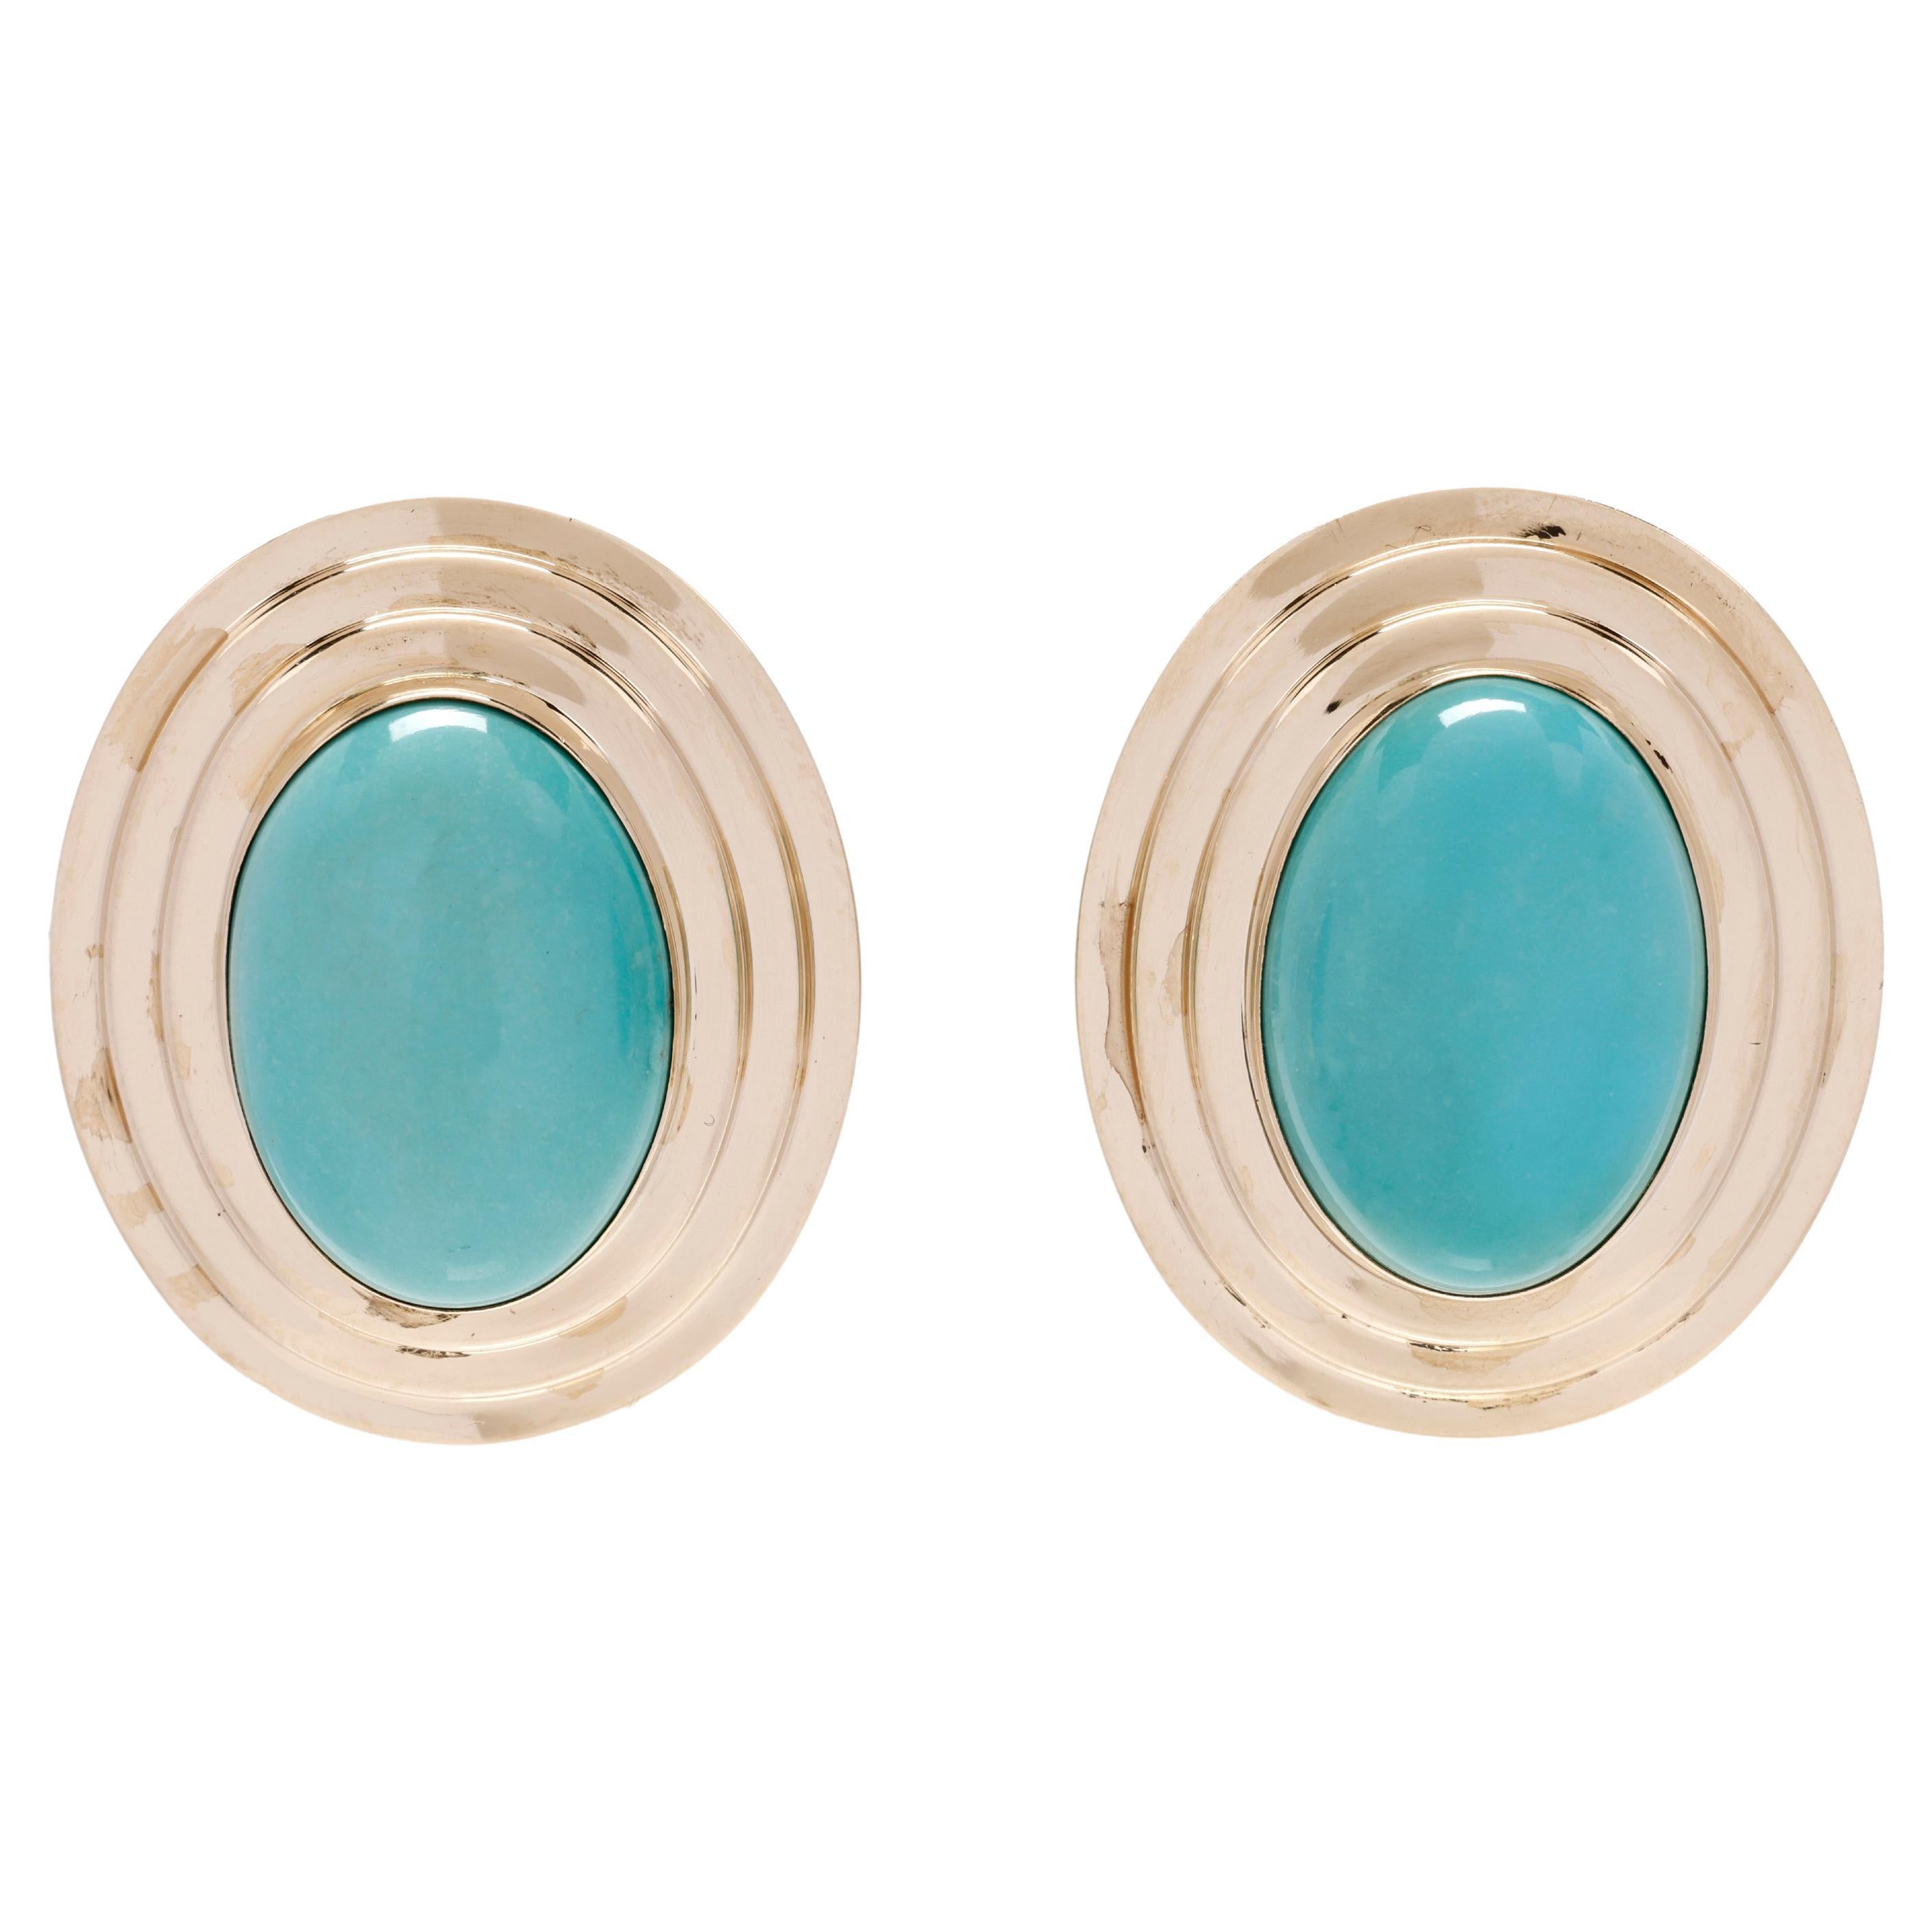 Vintage Large Turquoise Oval Stud Earrings, 14k Yellow Gold, Length 1 inch For Sale